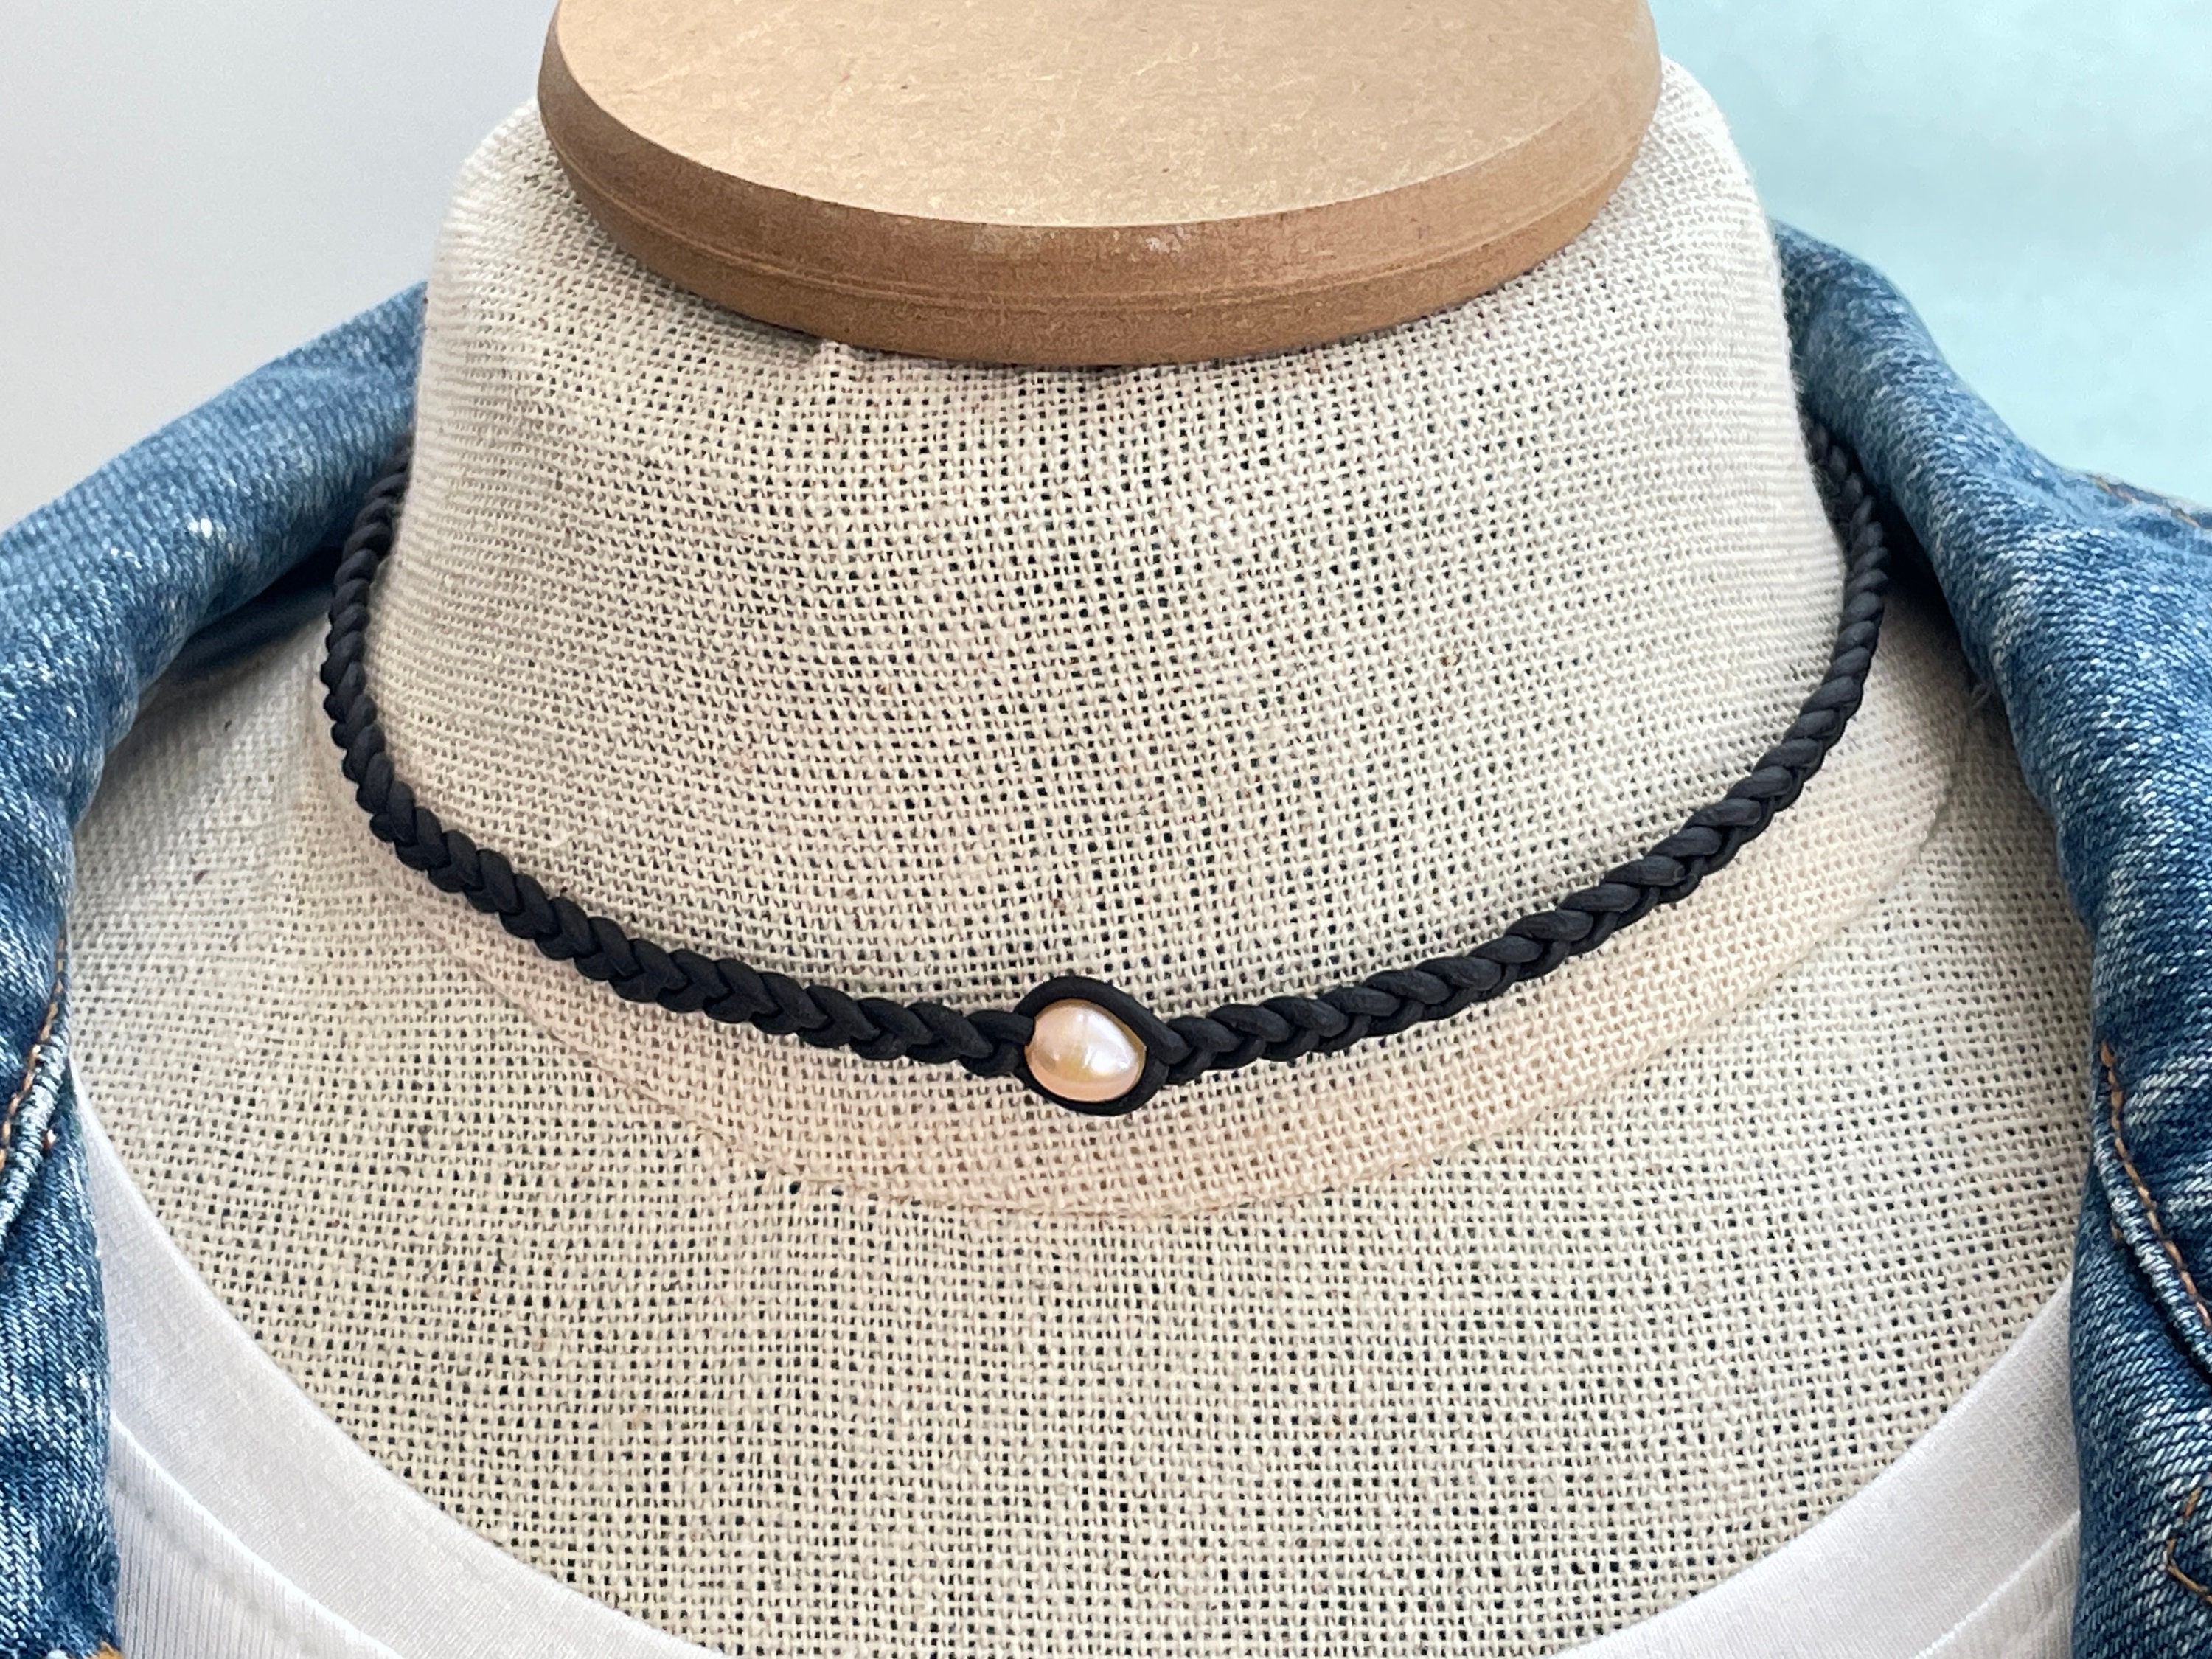 Studded Black Choker Necklace, Silver Studded Leather Choker, Black Leather  Chokers for Women Teens and Girls, Unisex Jewelry 